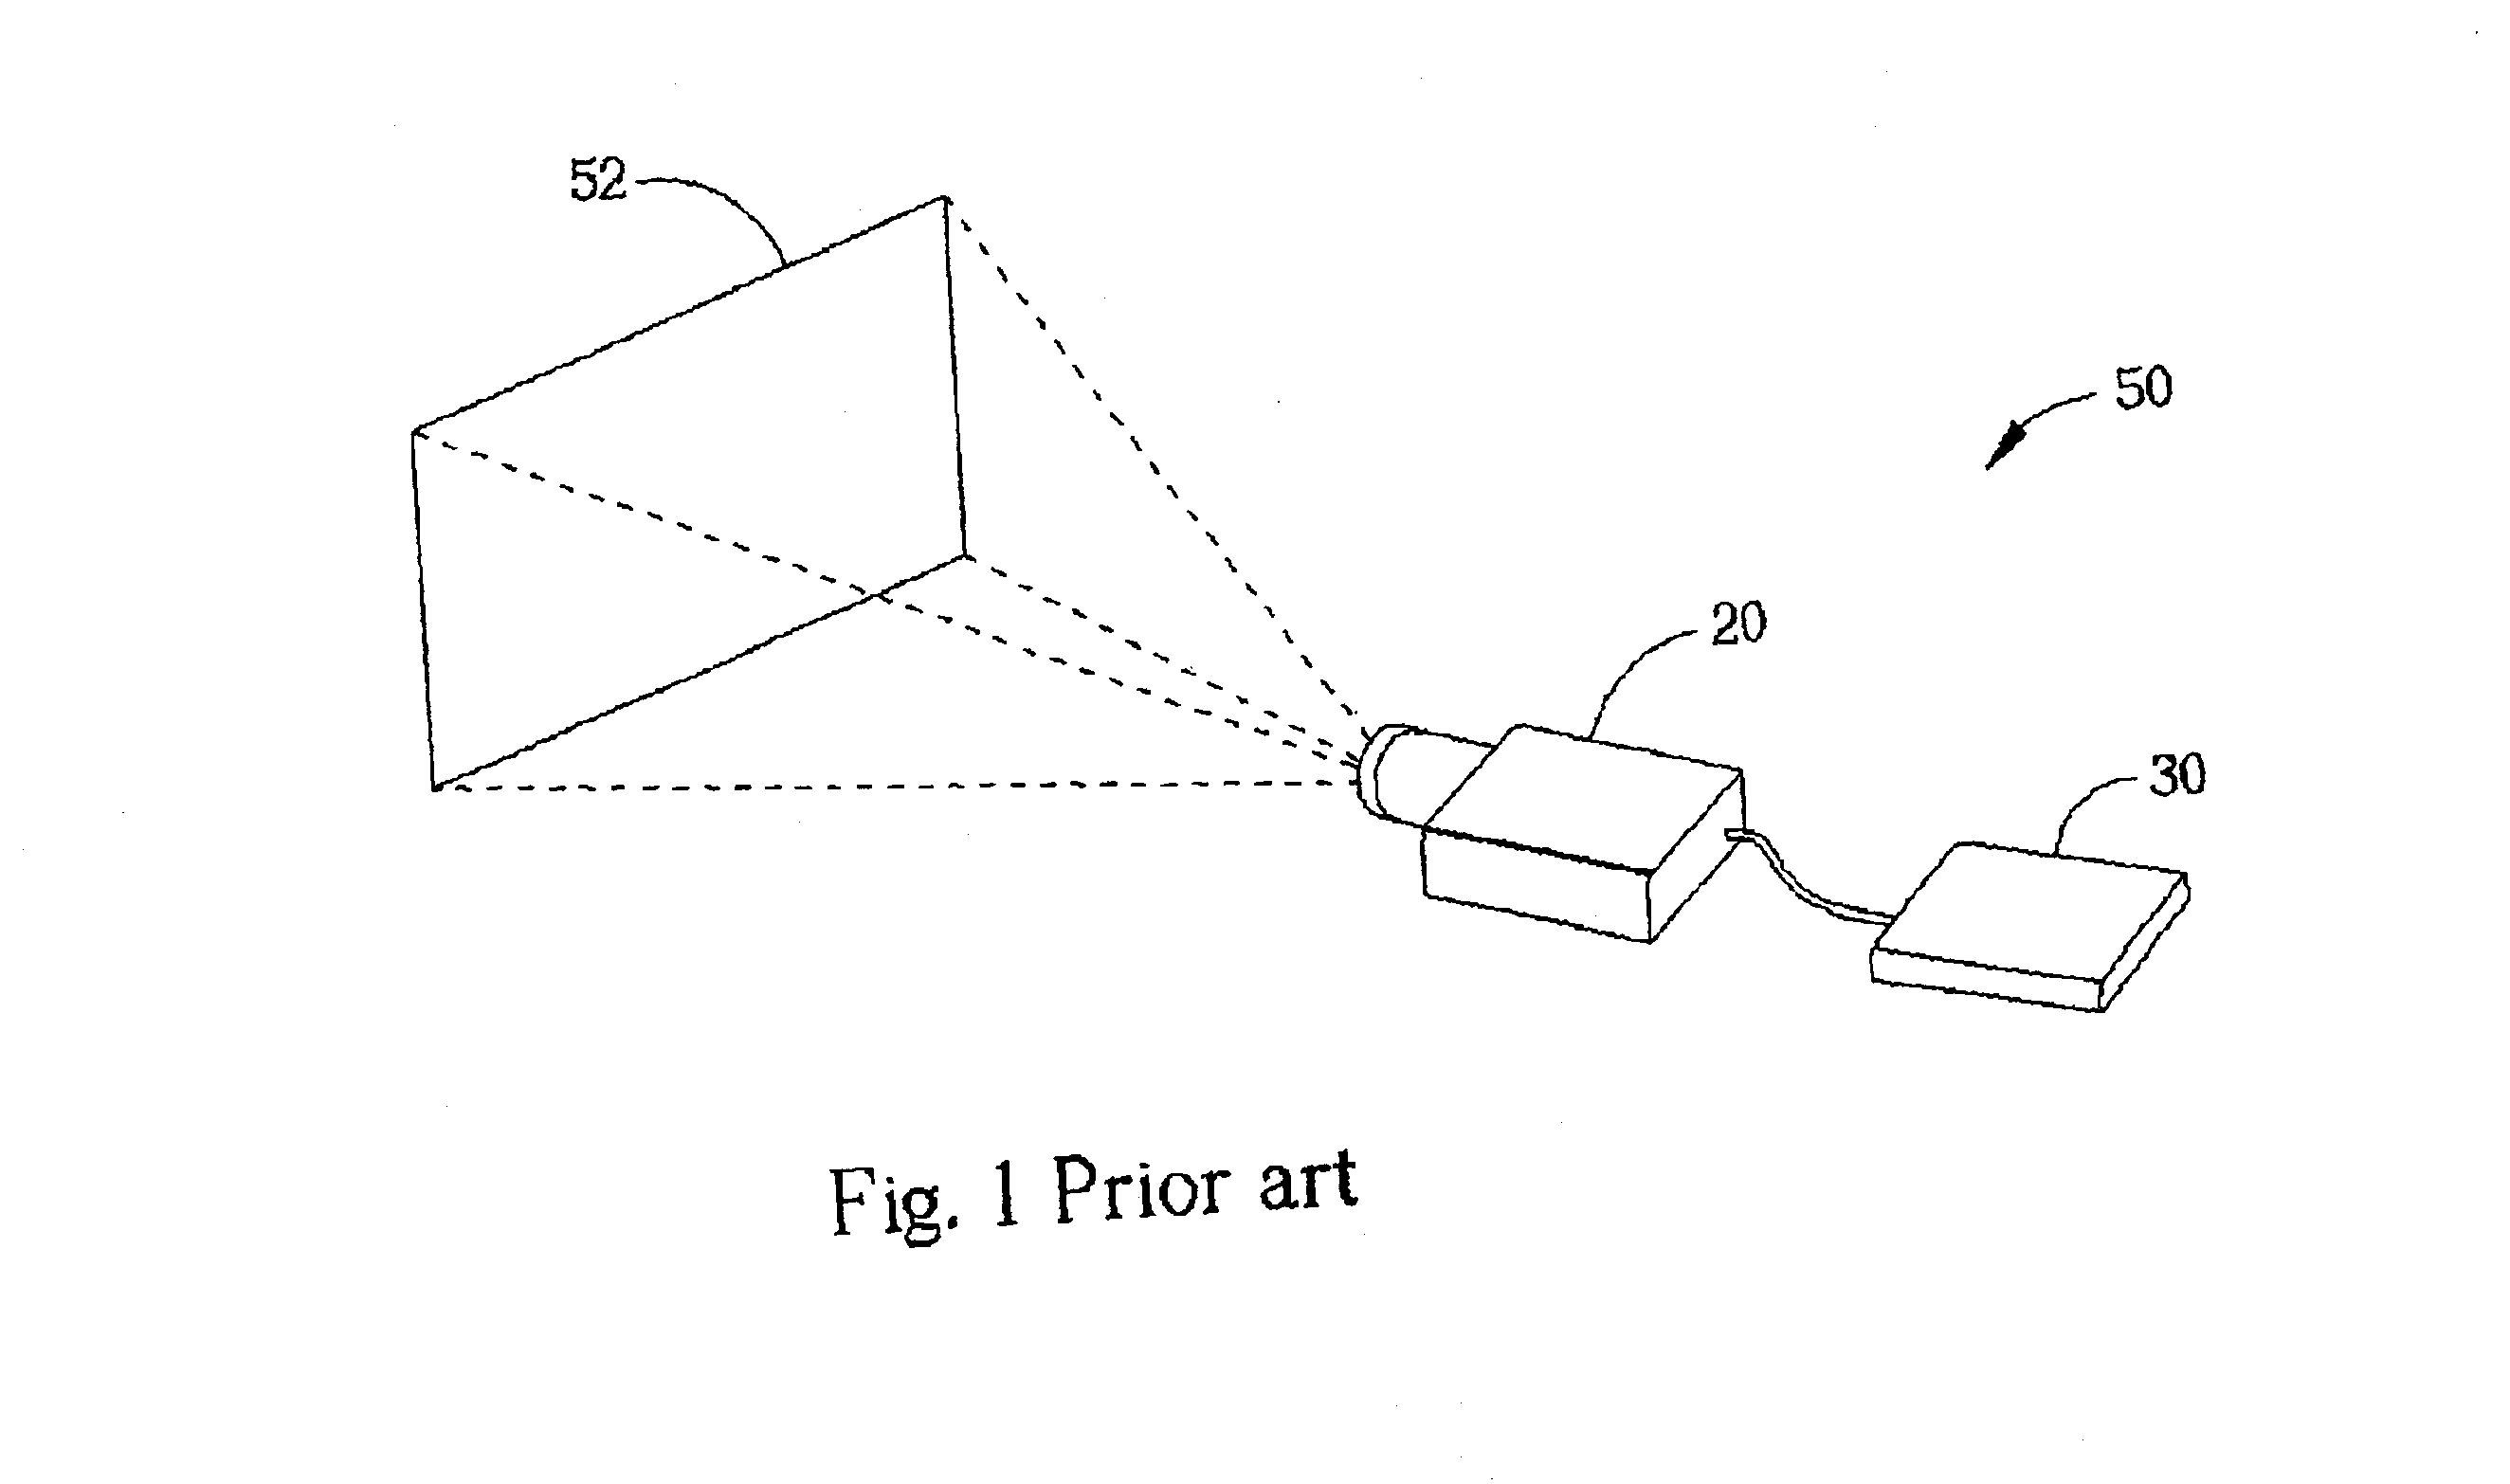 Method for detecting moving objects by comparing video images